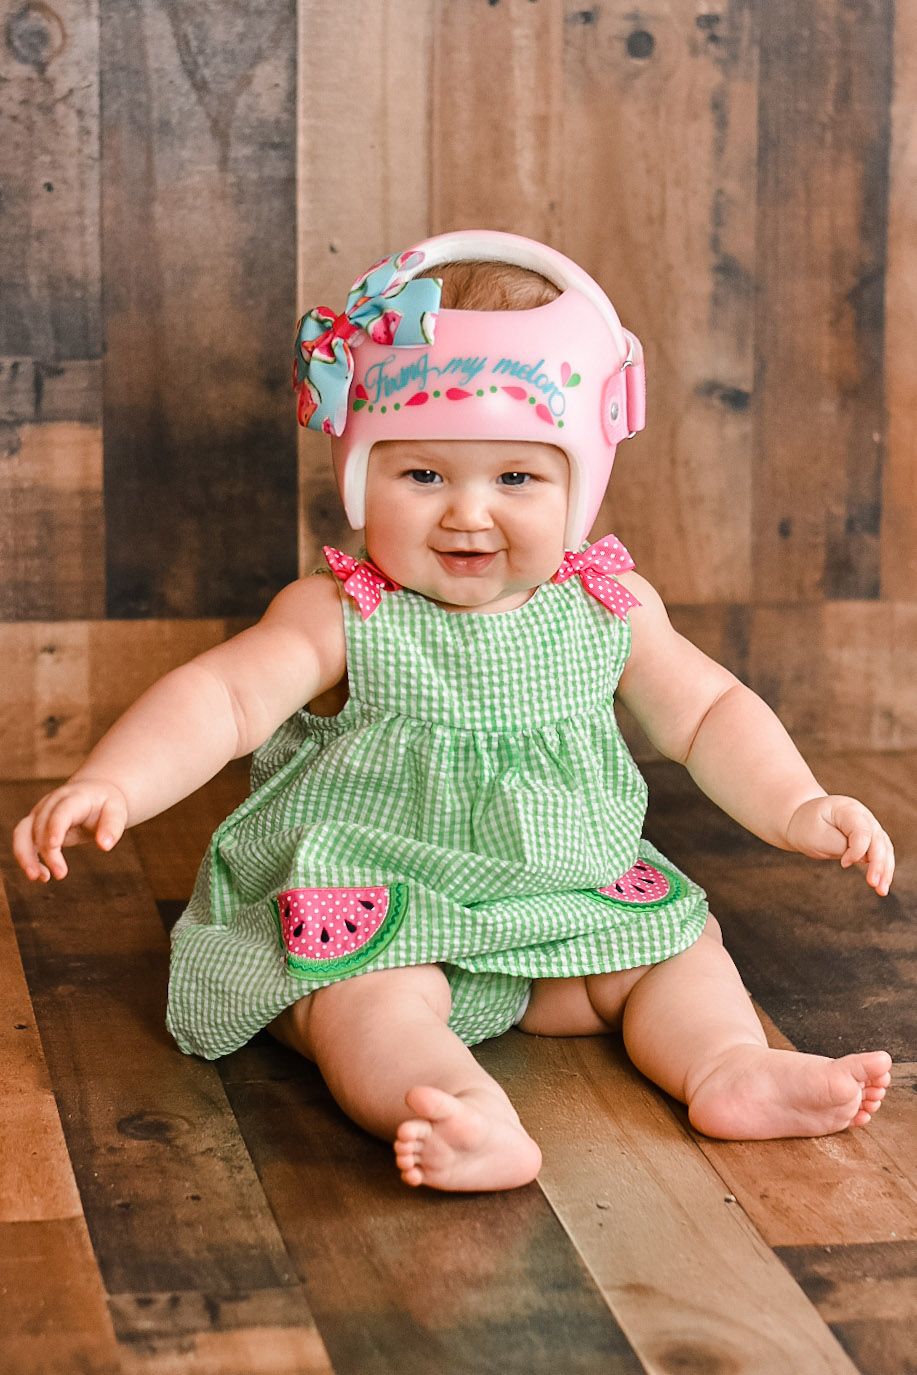 baby wearing cranial remolding orthosis and a watermelon themed outfit. Her cranial orthosis reads 'just fixing my melon'.